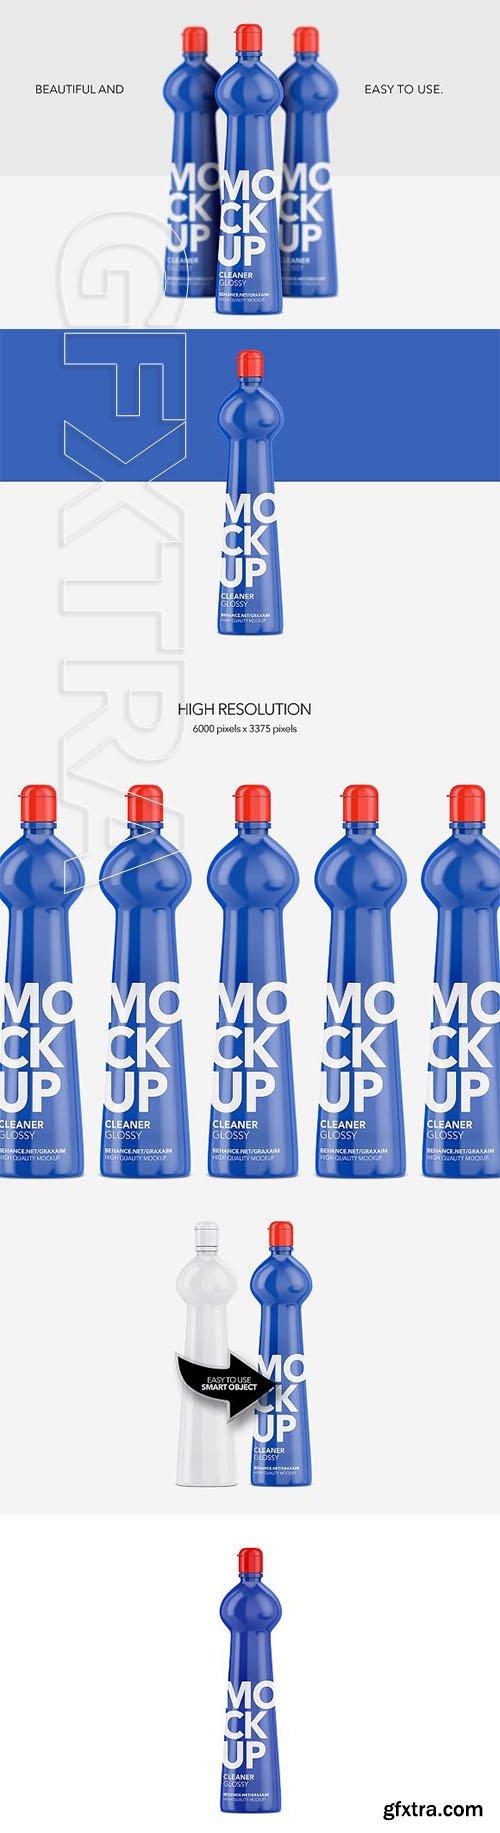 CreativeMarket - Cleaner Bottle - Glossy - Front View 2980889